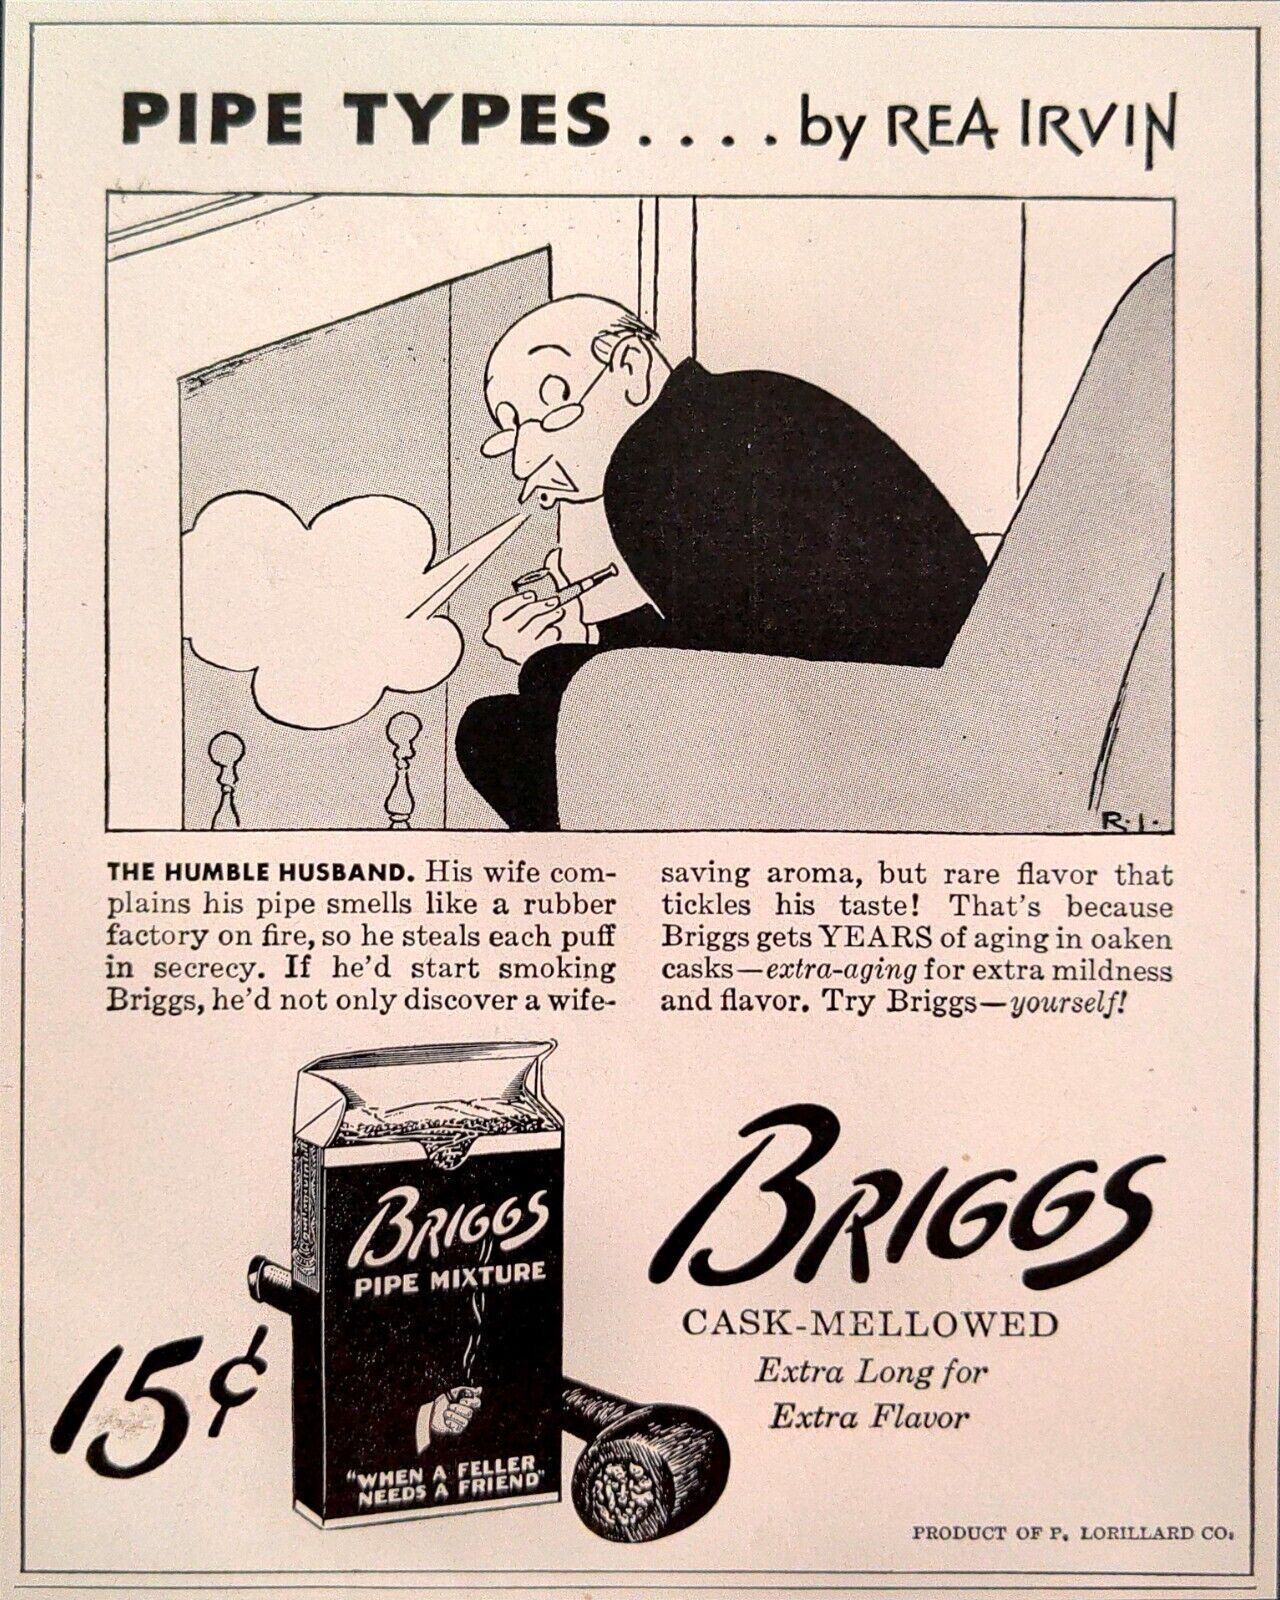 1944 Briggs Pipe Mixture Print Ad Pipe Types By Rea Irvin Comic Advertisement